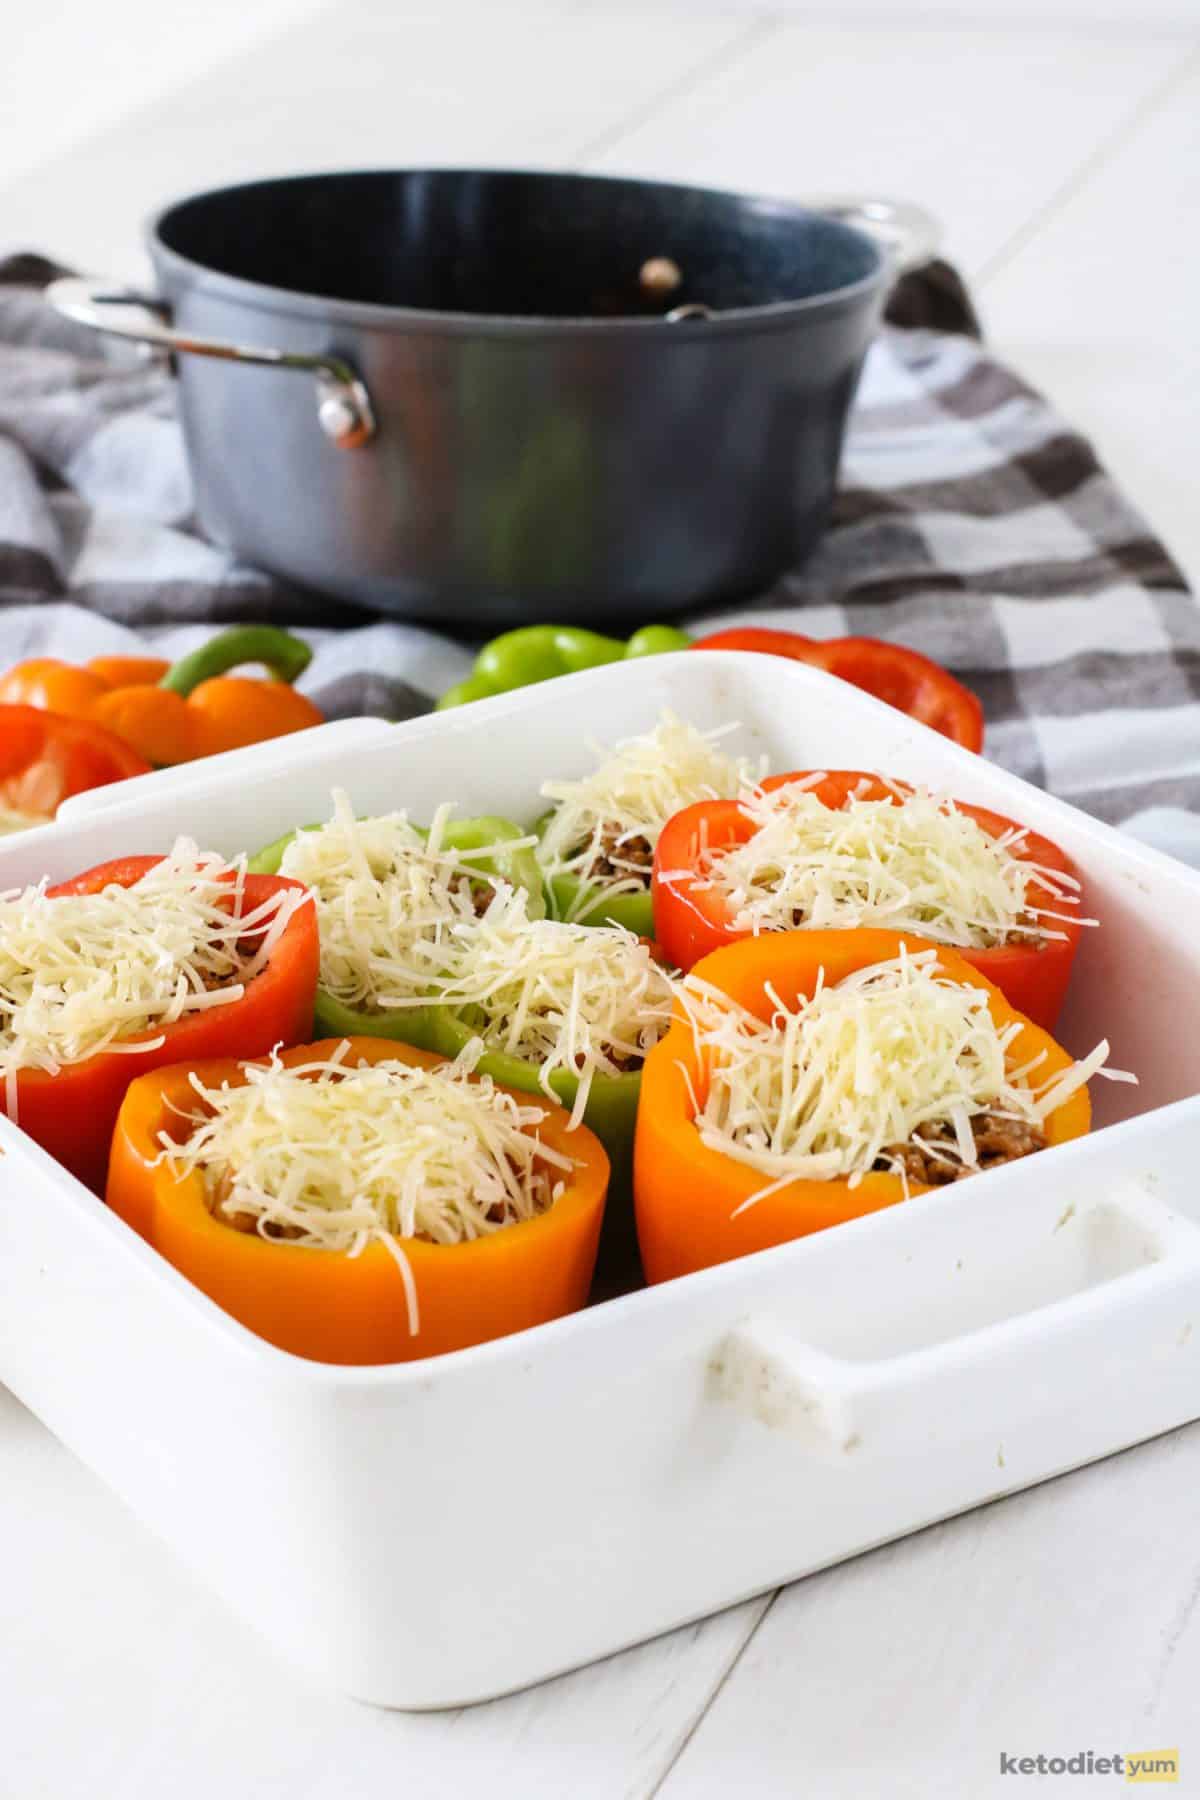 Bell peppers stuffed with ground beef, cauliflower and topped with Edam cheese in a baking pan ready to bake